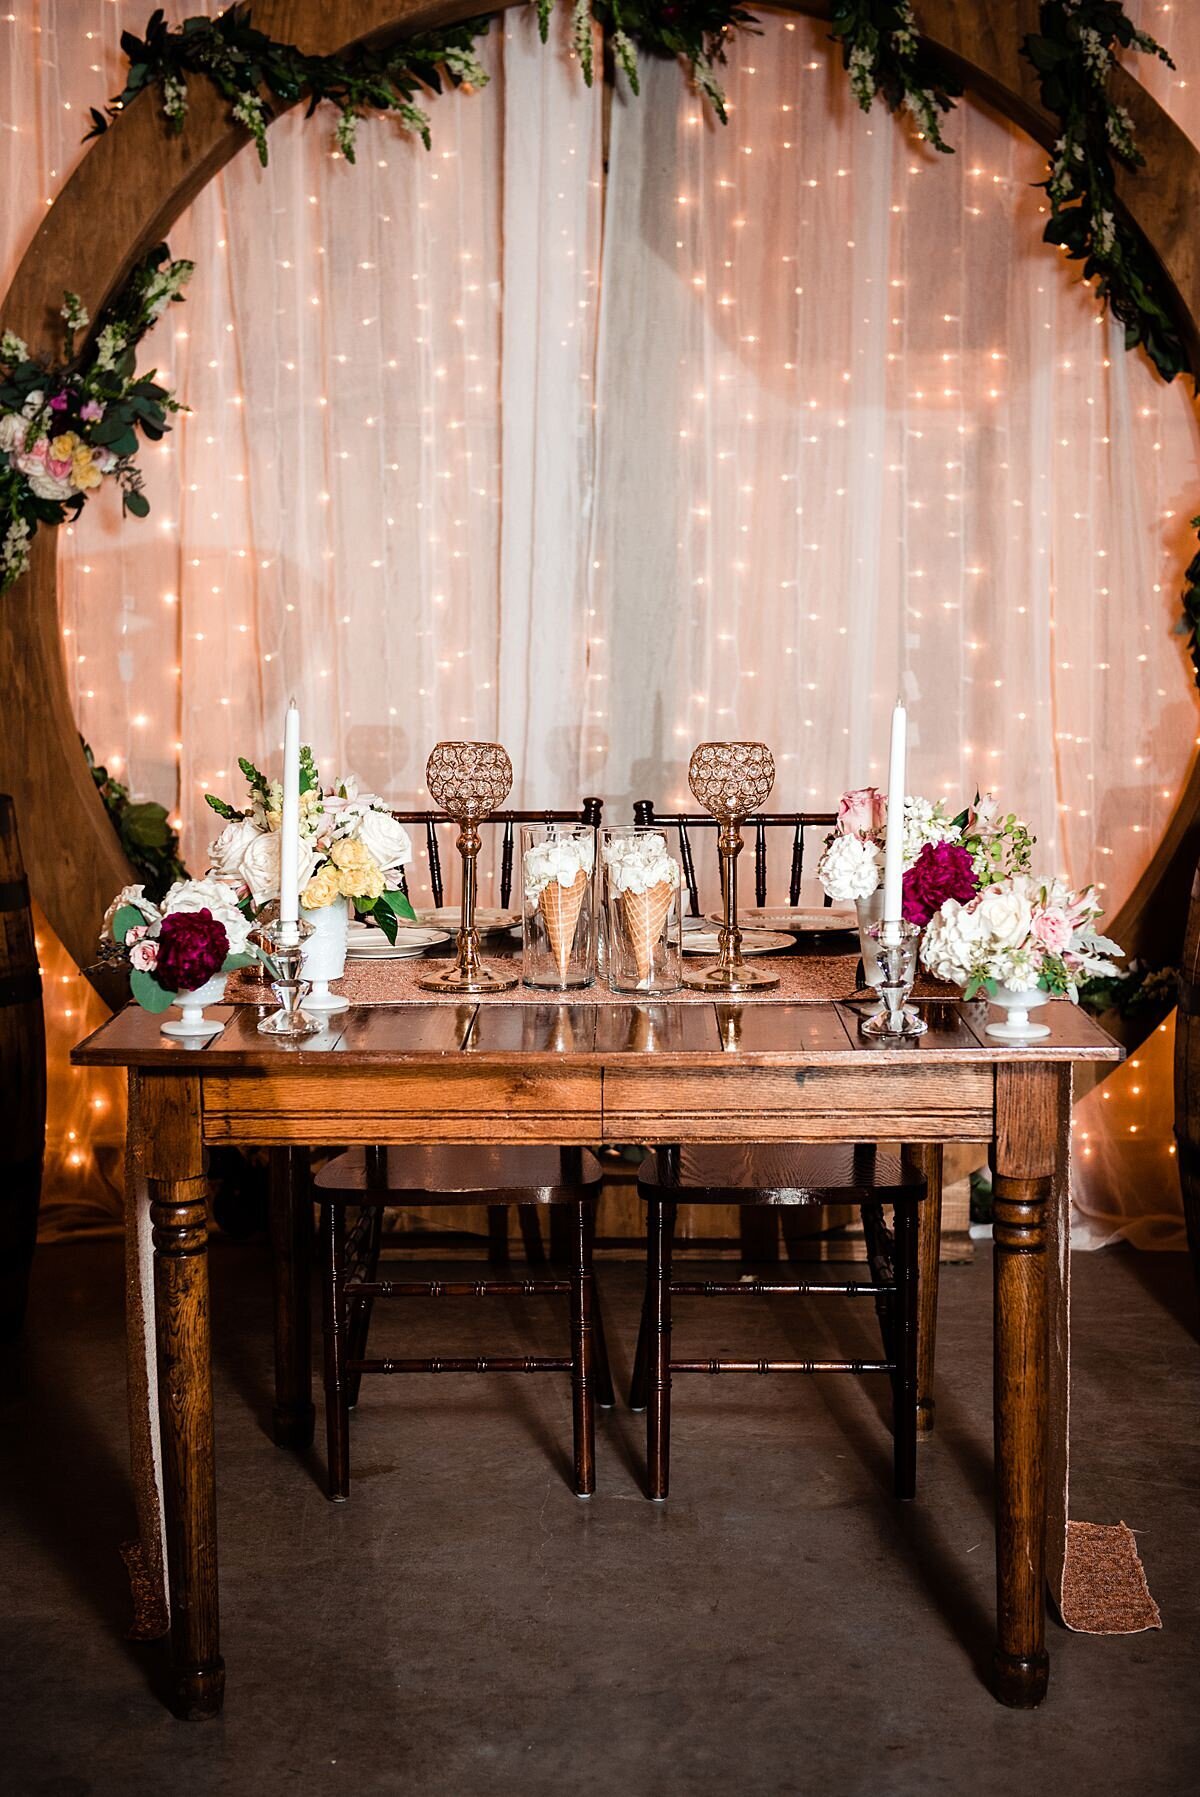 Circular dark wood ceremony arbor wrapped with a garland of greenery and ivory flowers sits against a wall with blush drapery and twinkle lights. In front of the arbor is a dark wood table decorated with rose gold crystal candle holders, long taper candlesticks, bouquets of burgundy peonies, peach roses, ivory roses, white veronica and white hydrangea. Two ice cream cones in glass vases sit at the center filled with white flowers at Grace Valley Farm.